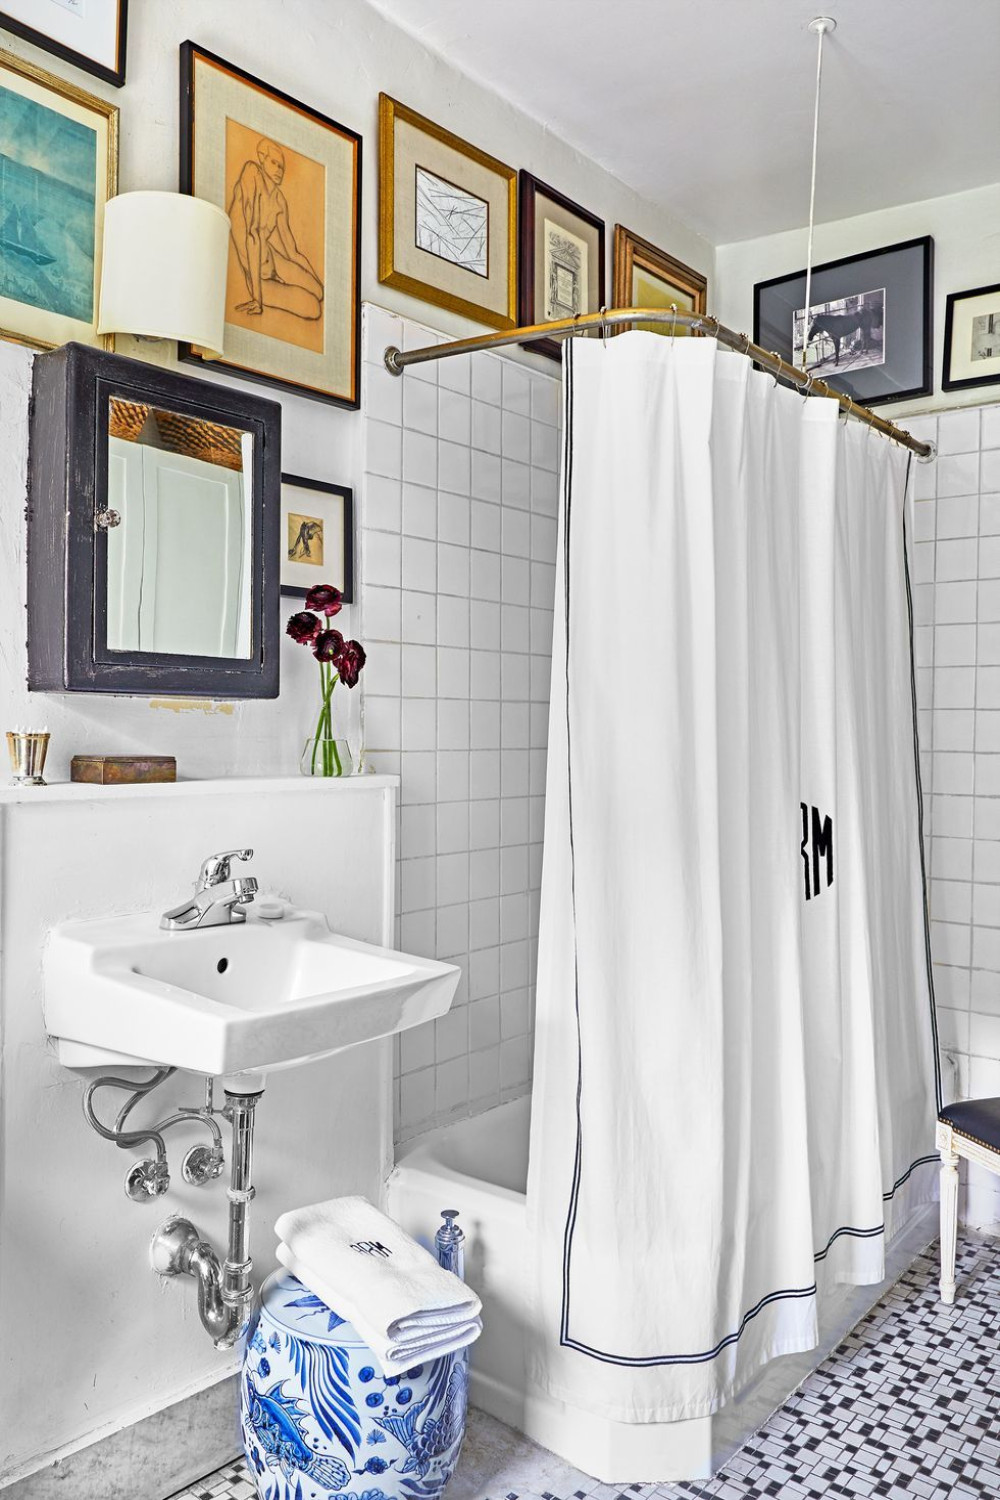 Bathroom Decorating Ideas on a Budget - Chic and Affordable